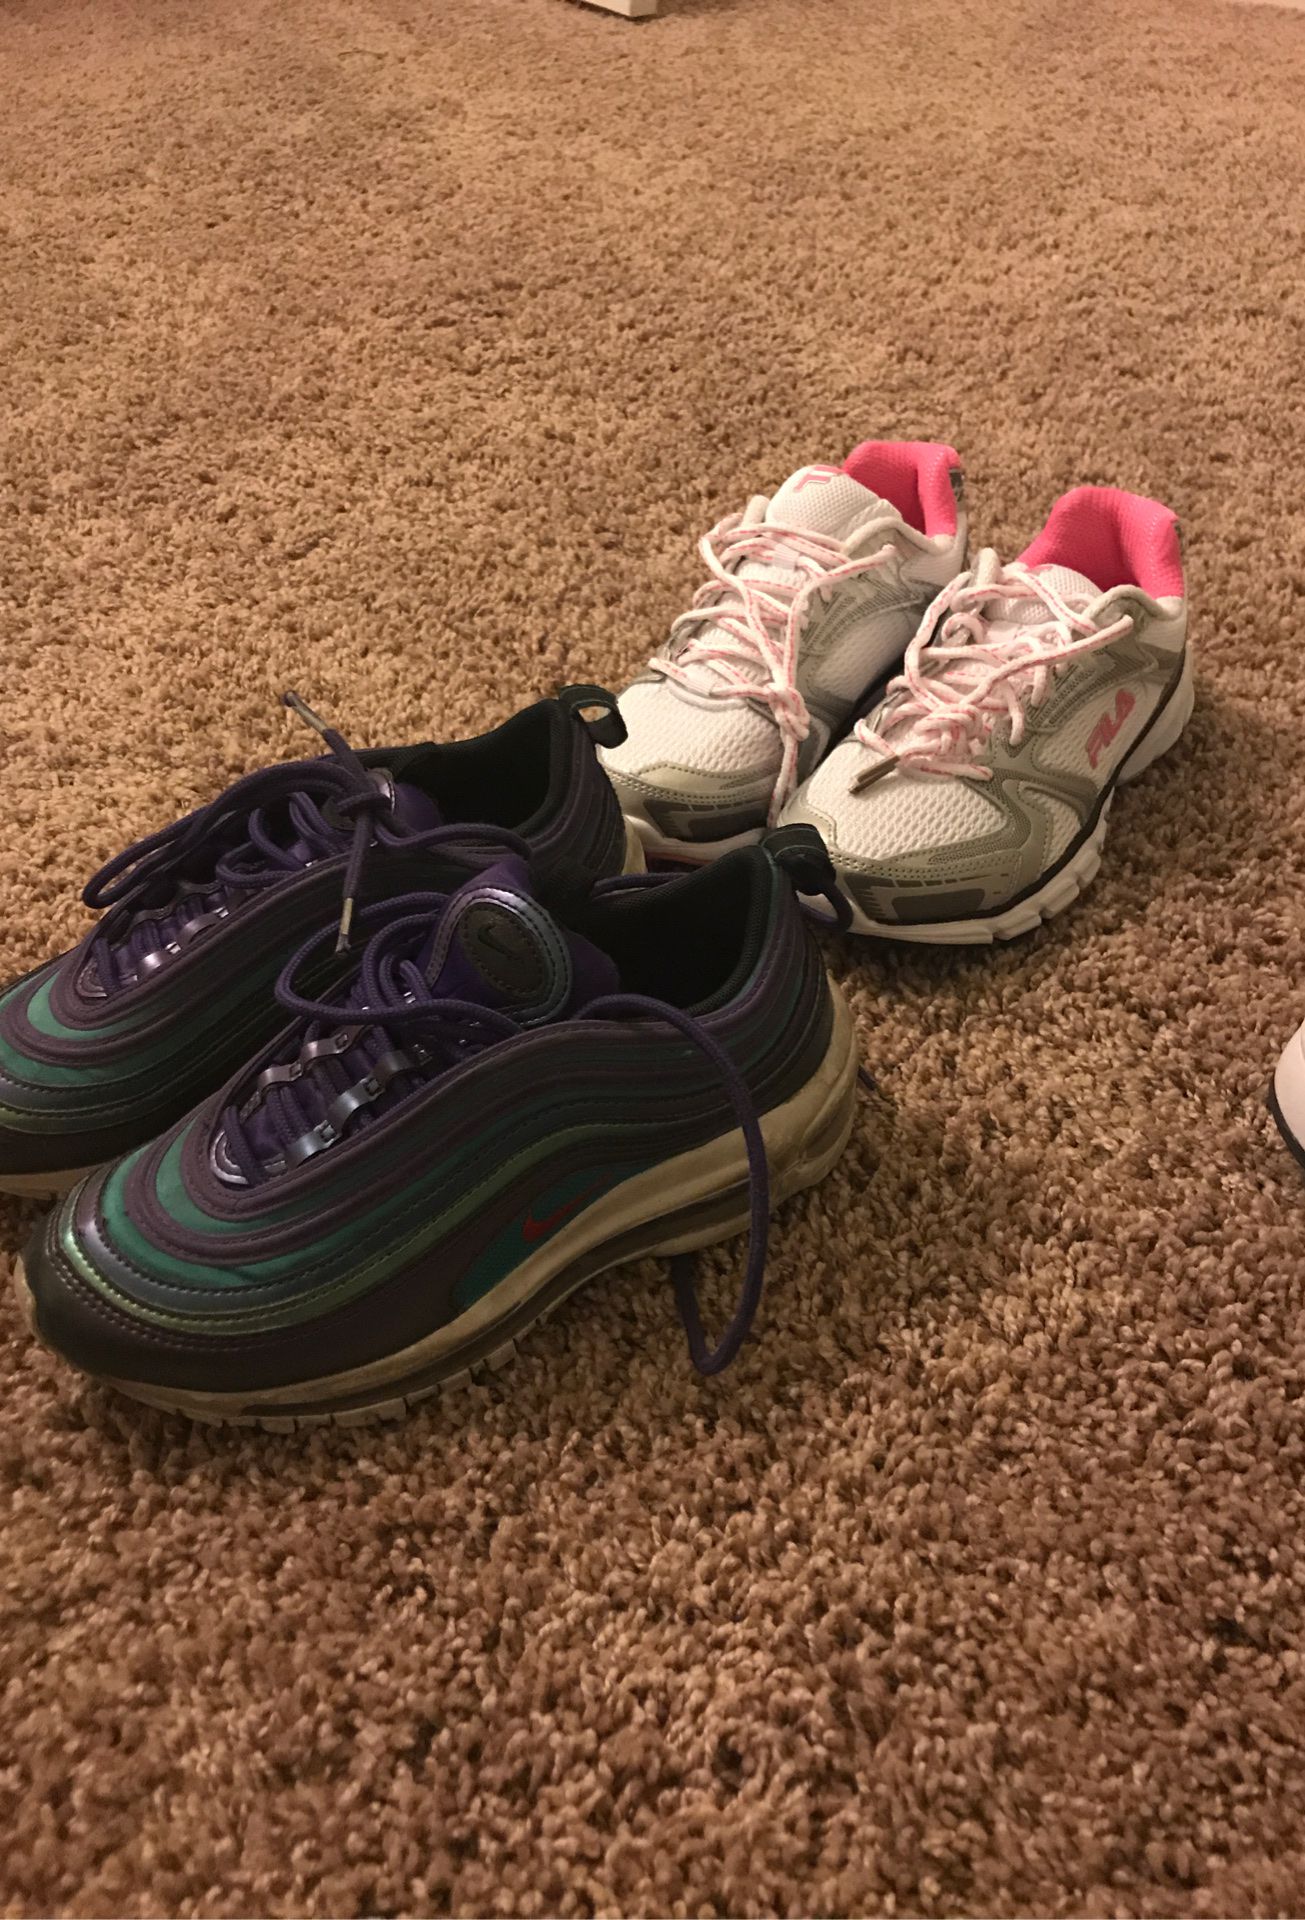 Nike’s and Fila deal 2 shoes for 30$ size 3.5y